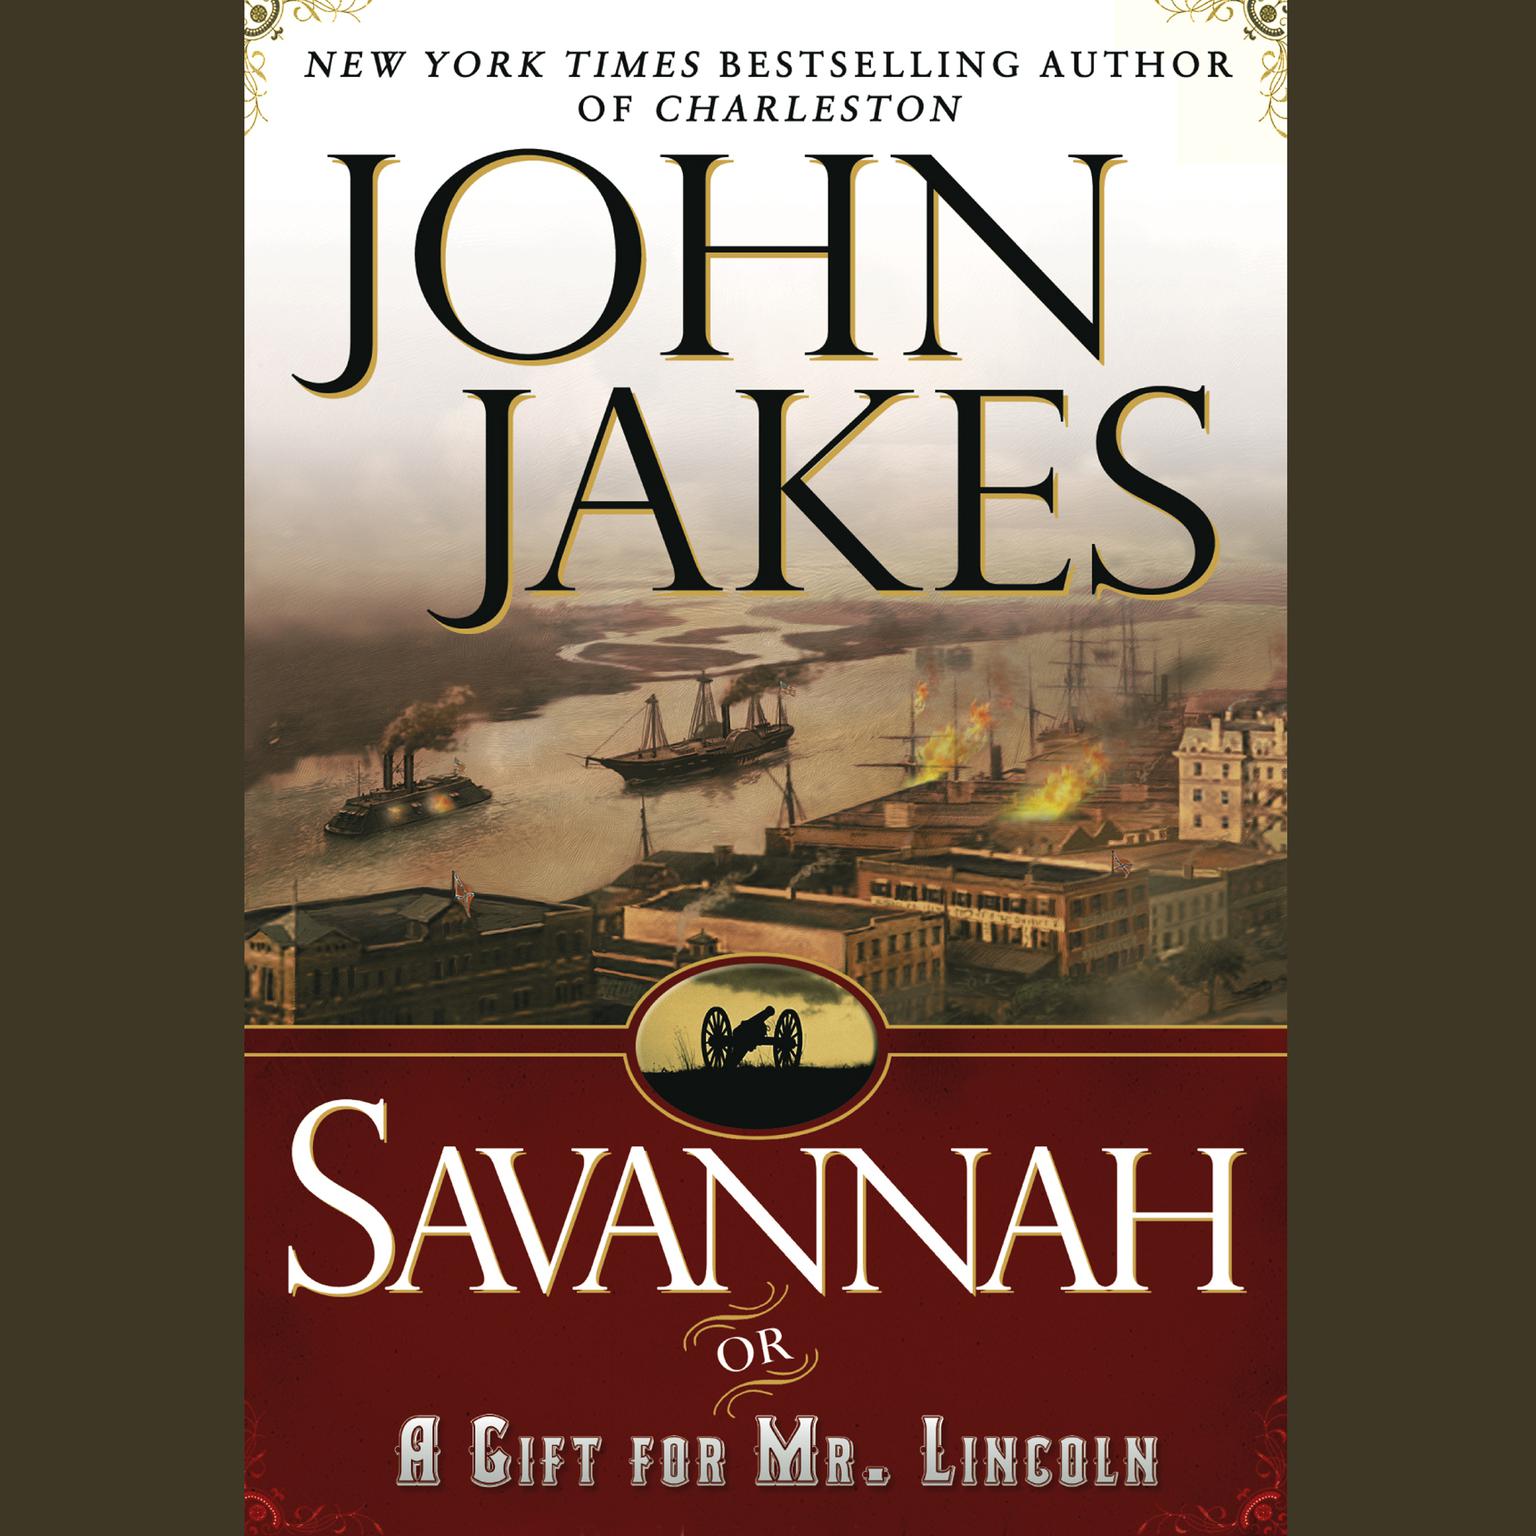 Savannah (Abridged): Or a Gift for Mr. Lincoln Audiobook, by John Jakes